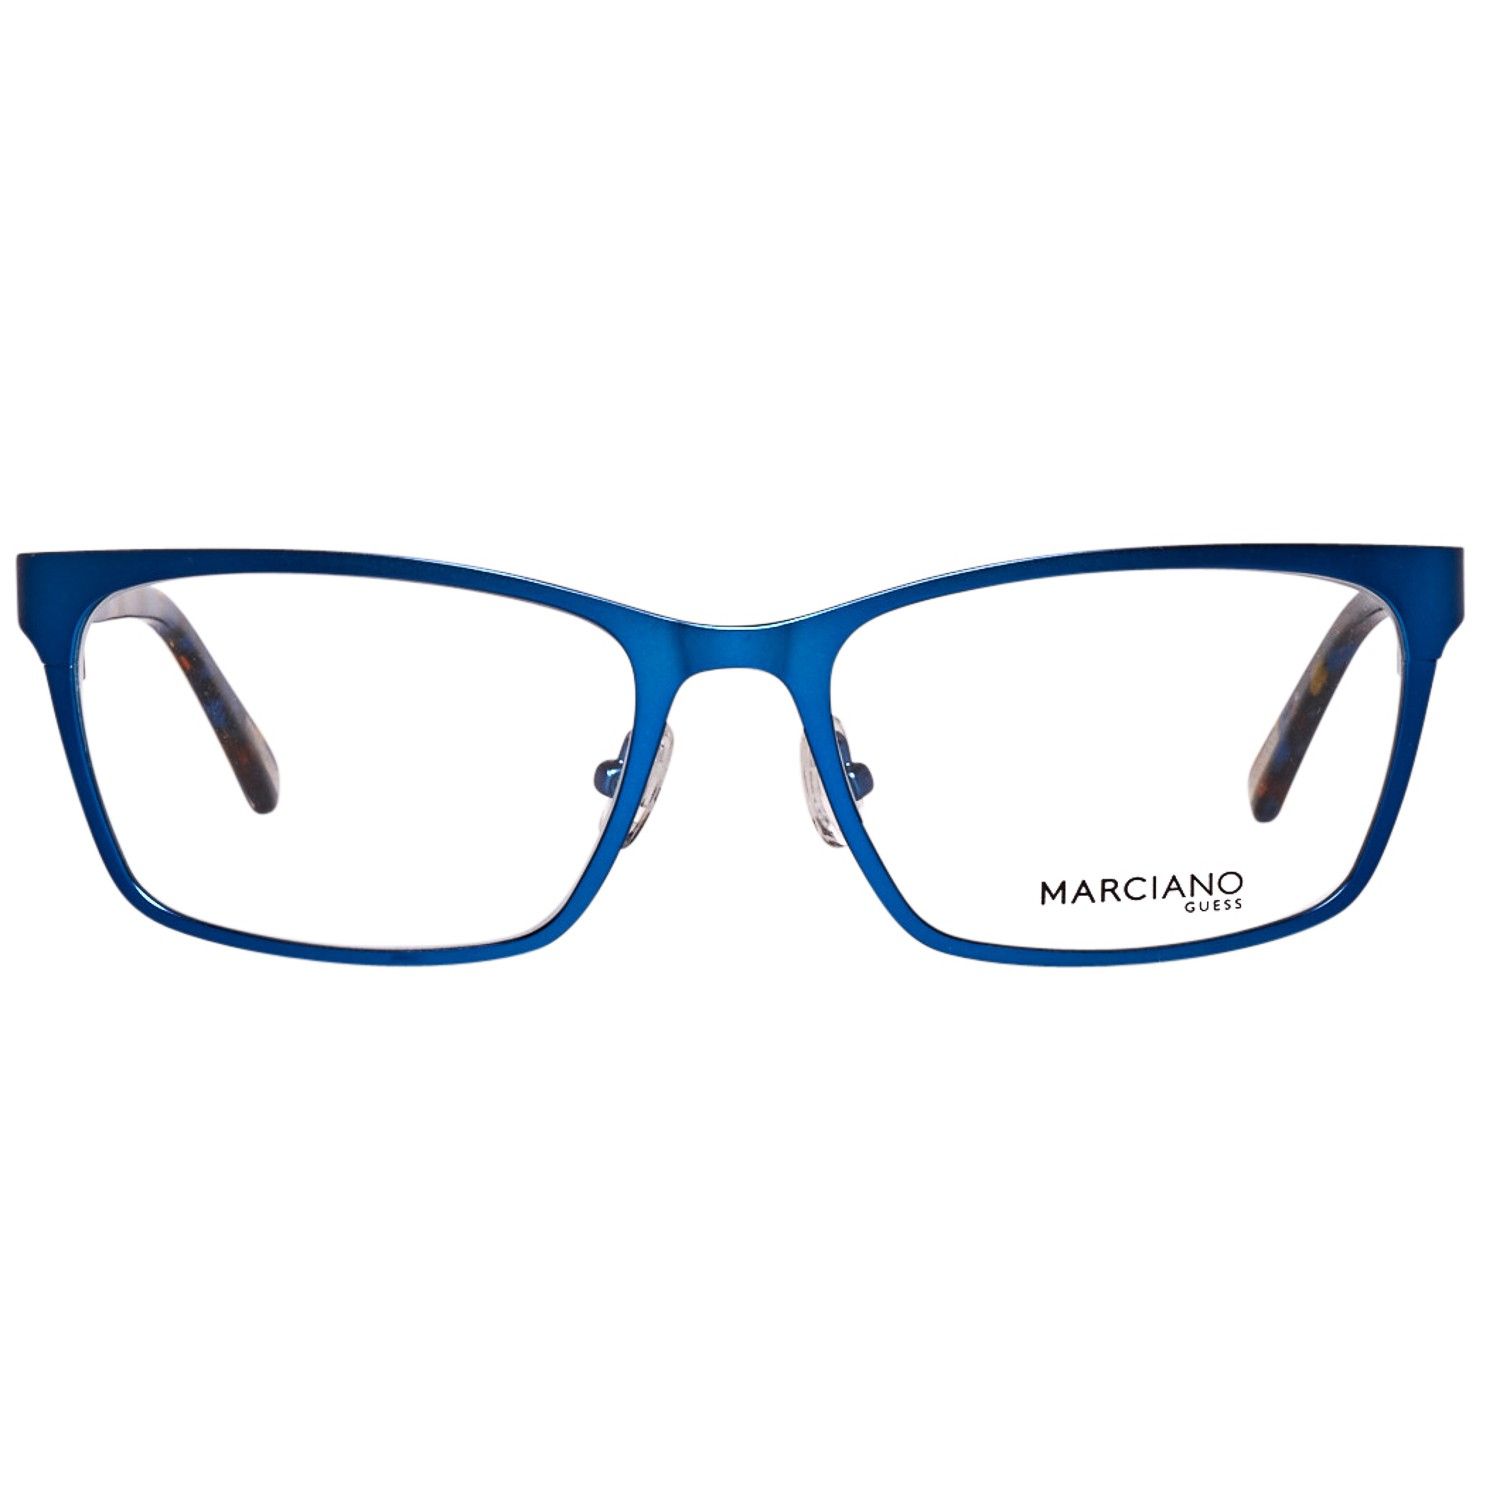 Guess By Marciano Optical Frame GM0271 091 54
Frame color: Blue
Lenses width: 54
Lenses heigth: 35
Bridge length: 17
Frame width: 138
Temple length: 135
Shipment includes: Case, Cleaning cloth
Style: Full-Rim
Women: Women